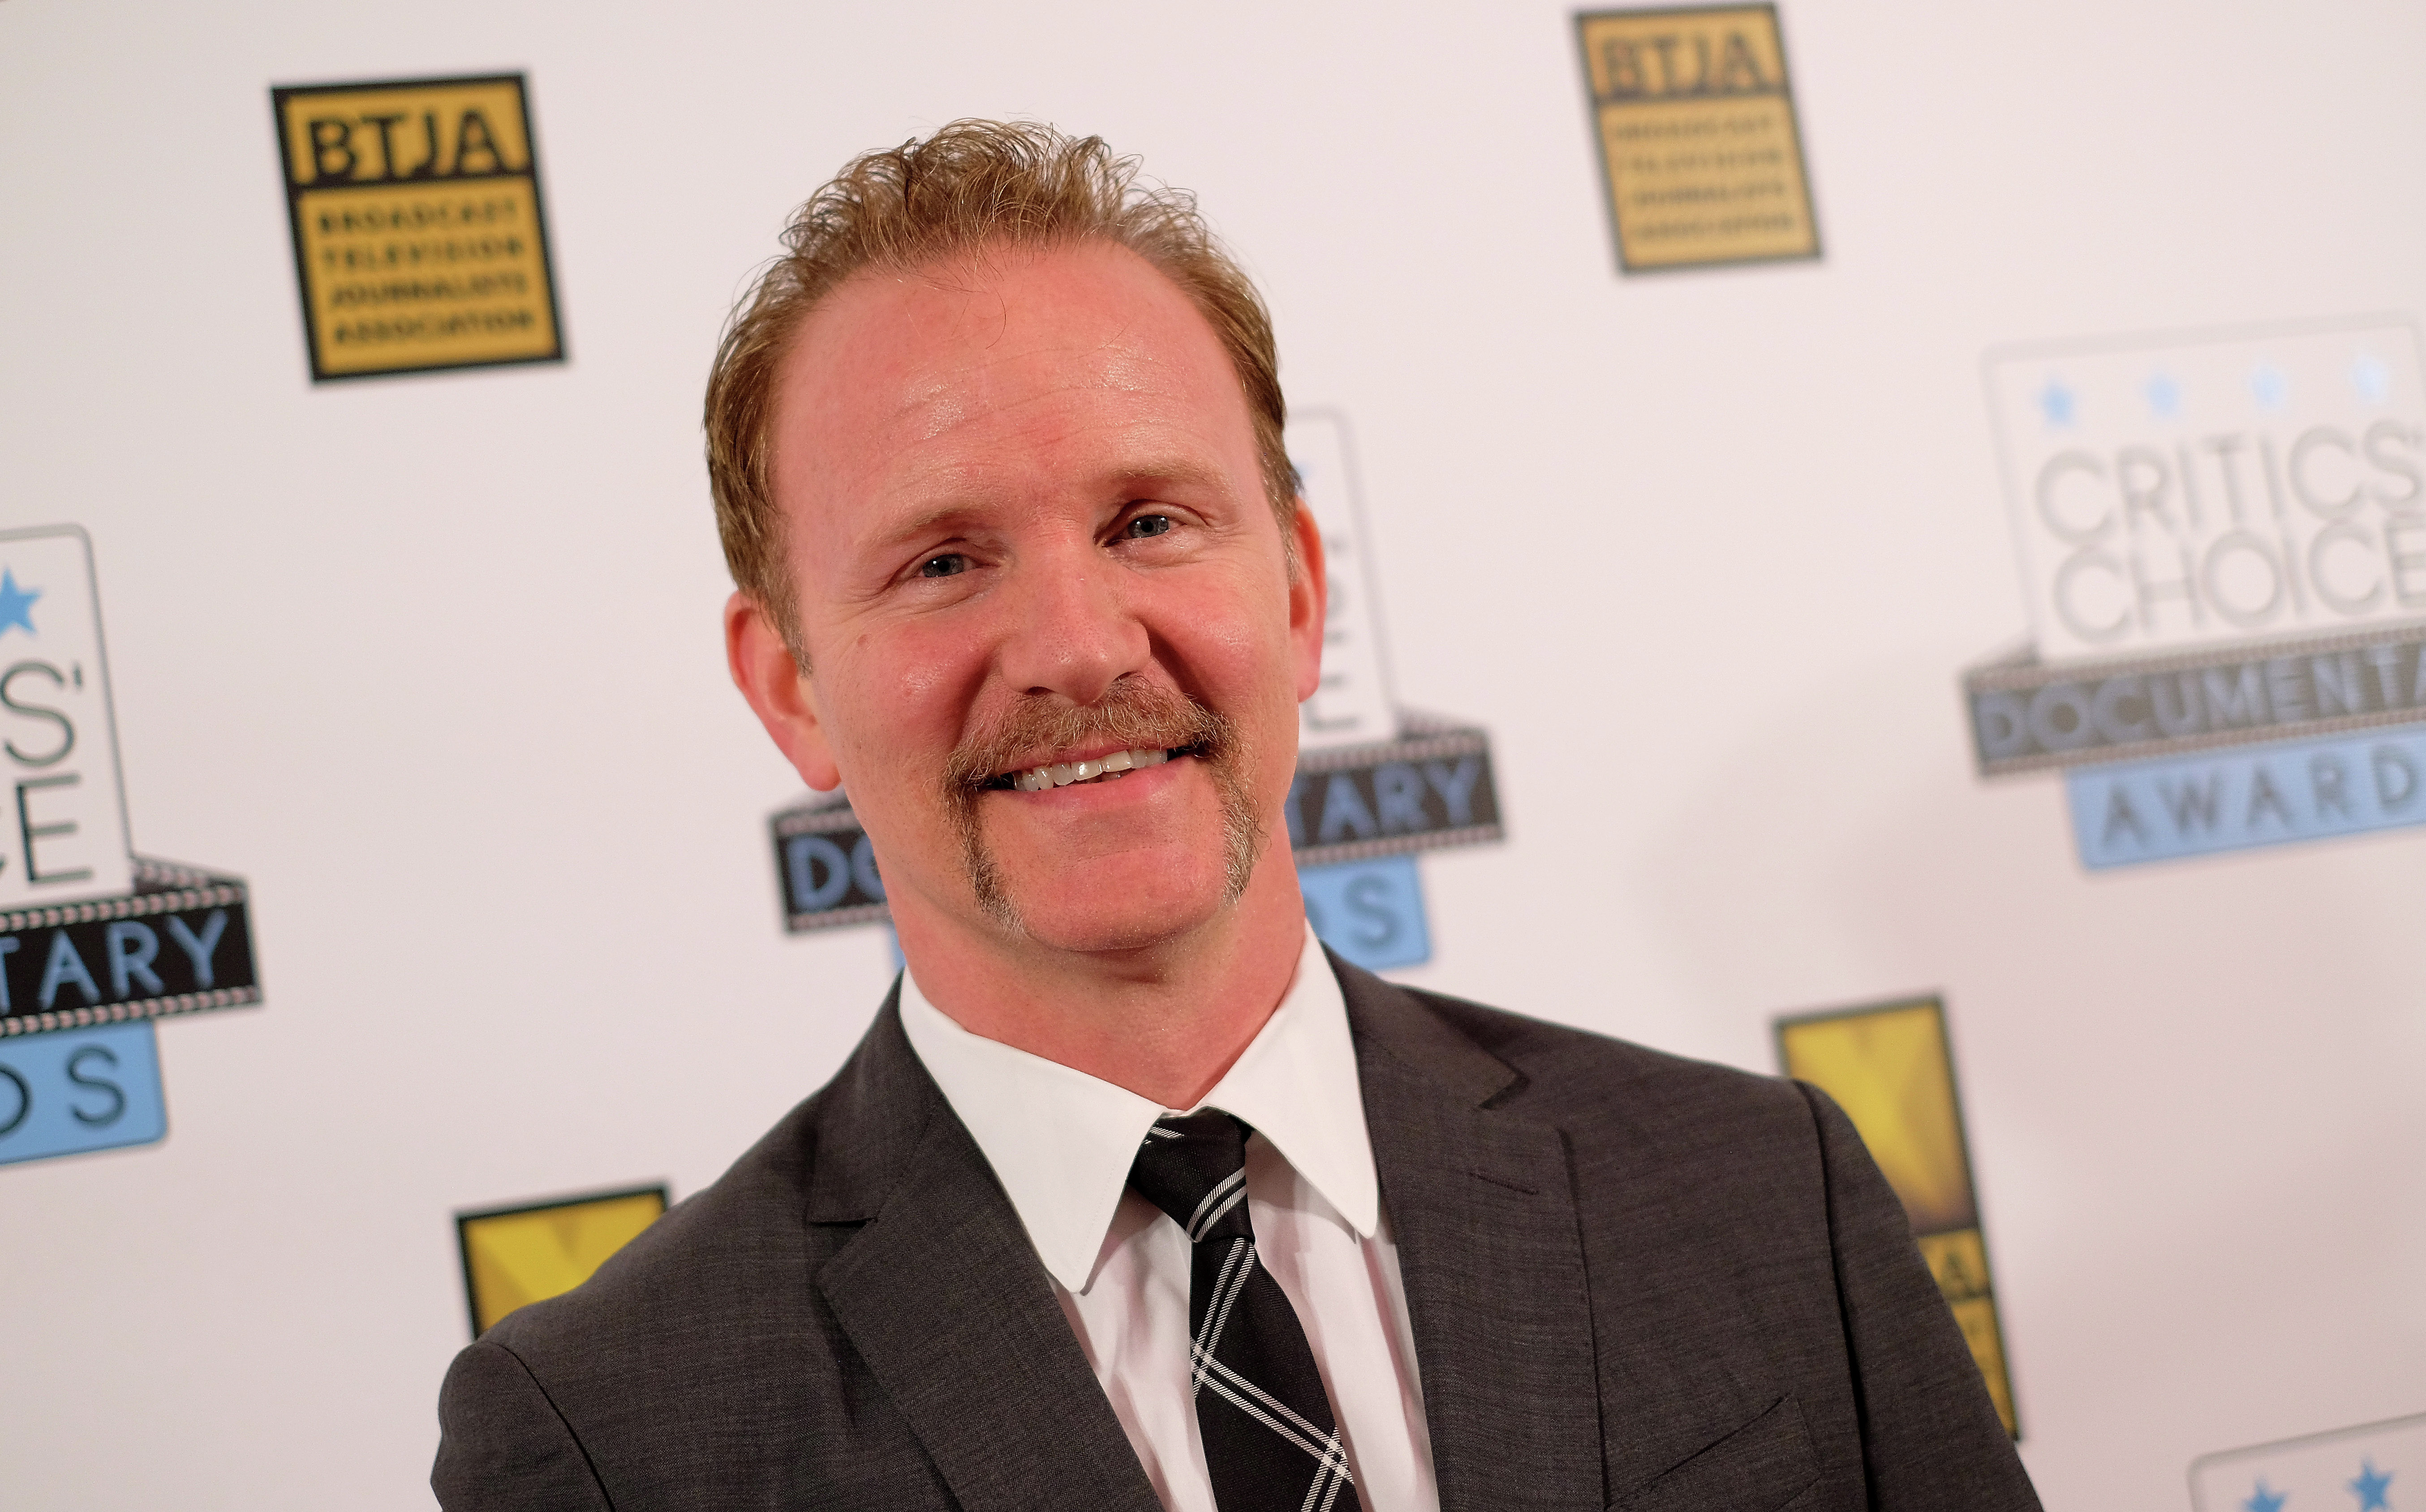 Morgan Spurlock, filmmaker best known for "Super Size Me" documentary, dead at 53